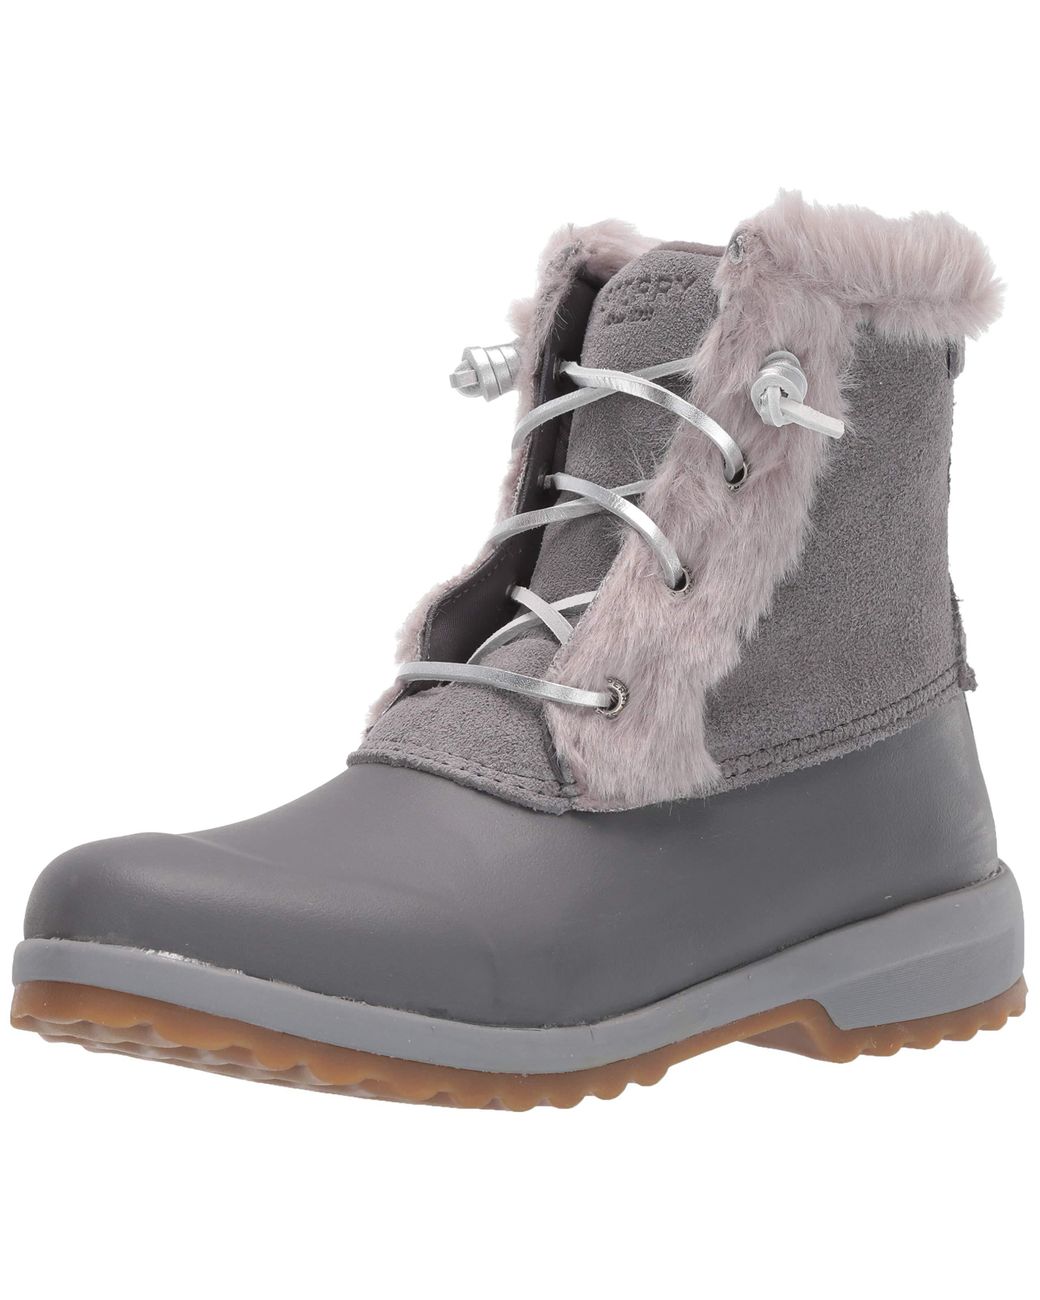 sperry women's maritime repel suede snow boot for Sale,Up To OFF 67%